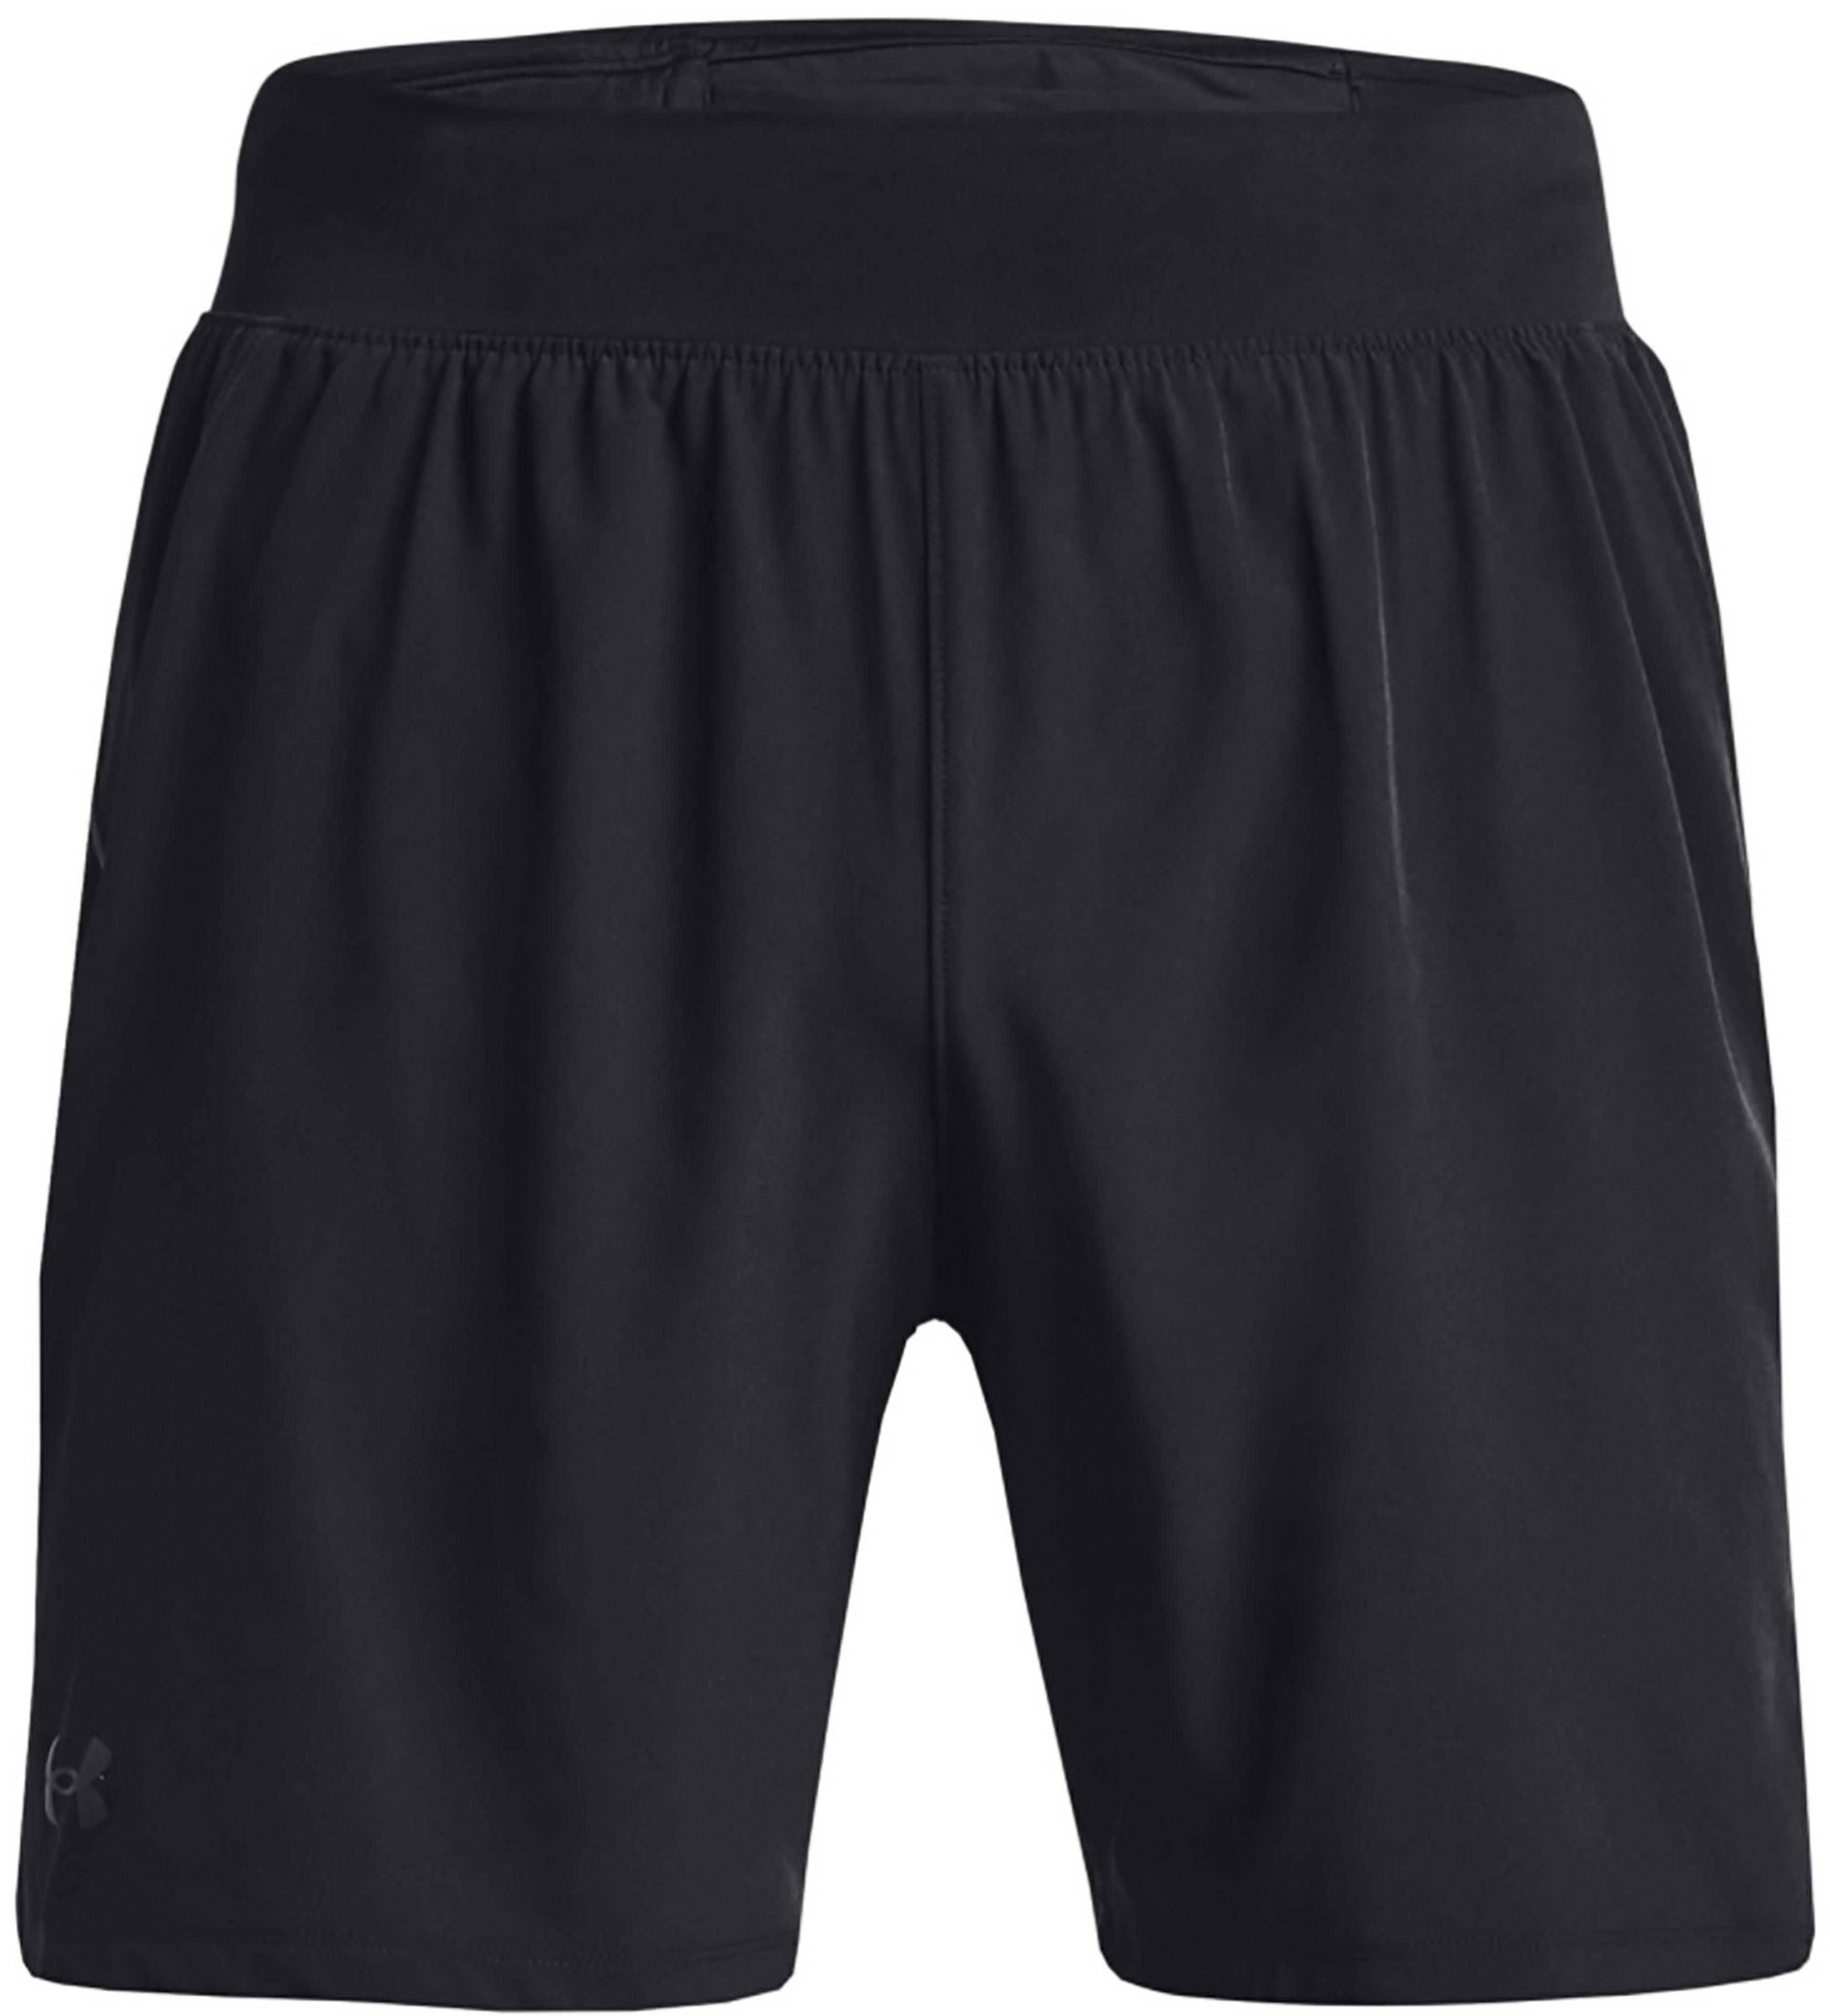 Under Armour Launch Elite 7'' Shorts | Wiggle